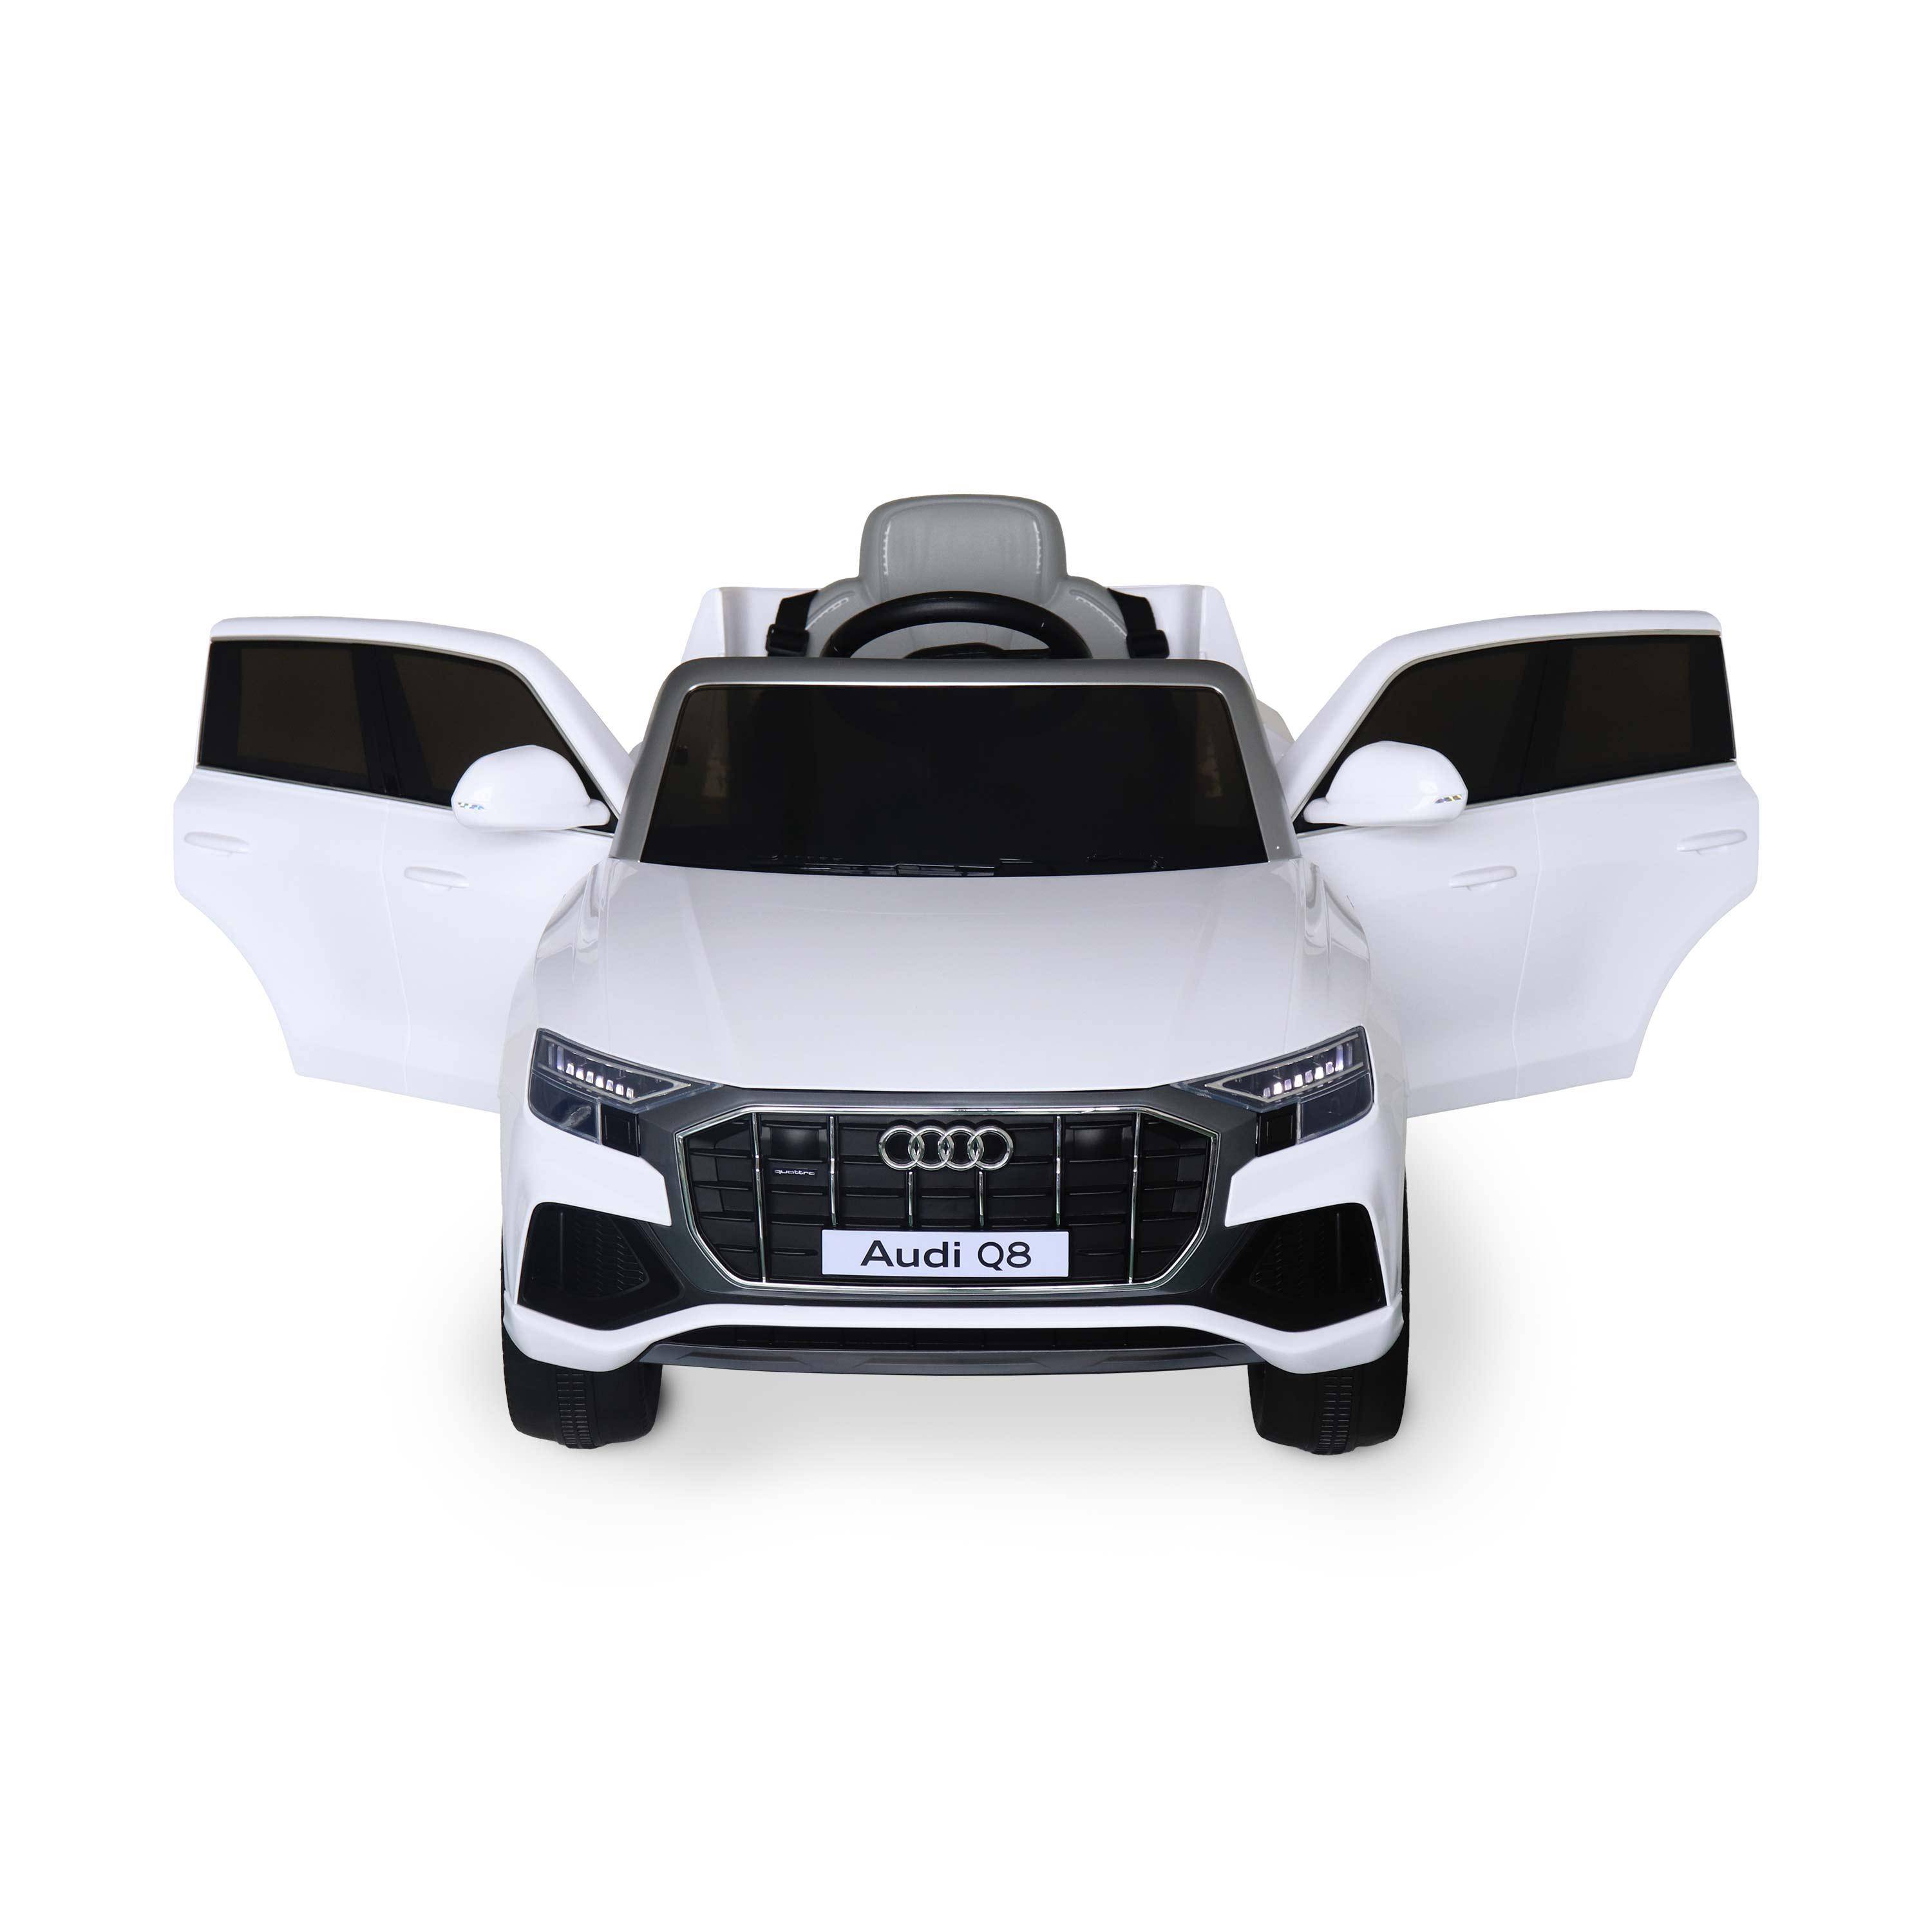 Children's electric car 12V, 1 seat with car radio and remote control - AUDI Q8 - White,sweeek,Photo2